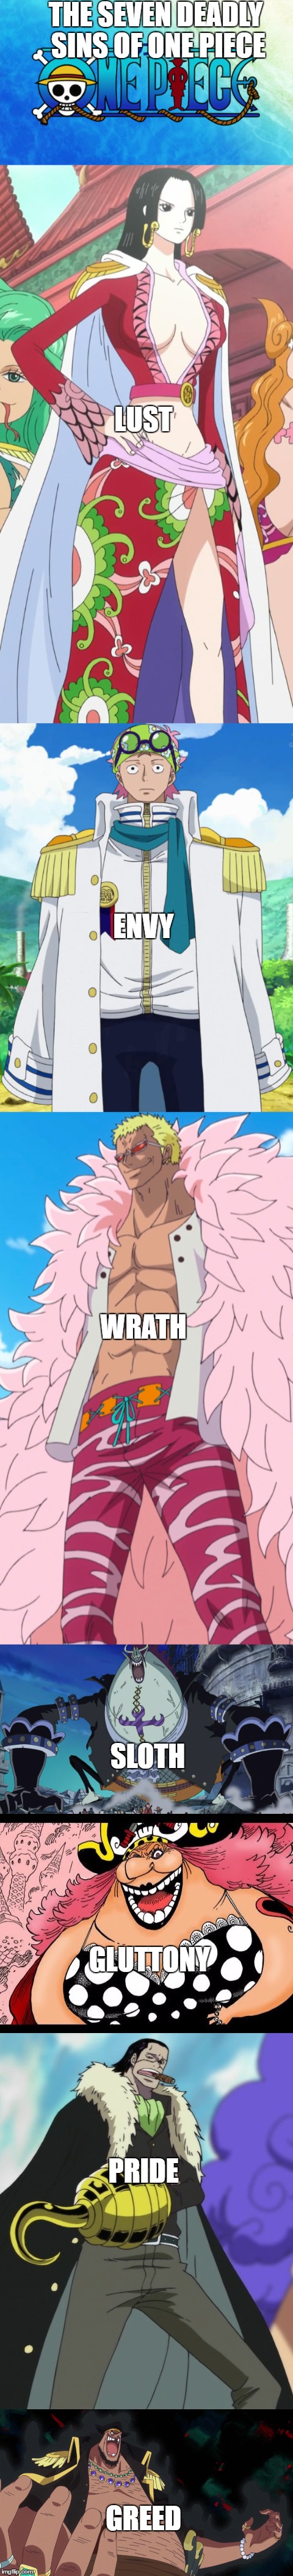 THE SEVEN DEADLY SINS OF ONE PIECE; LUST; ENVY; WRATH; SLOTH; GLUTTONY; PRIDE; GREED | image tagged in anime,one piece,7 deadly sins | made w/ Imgflip meme maker